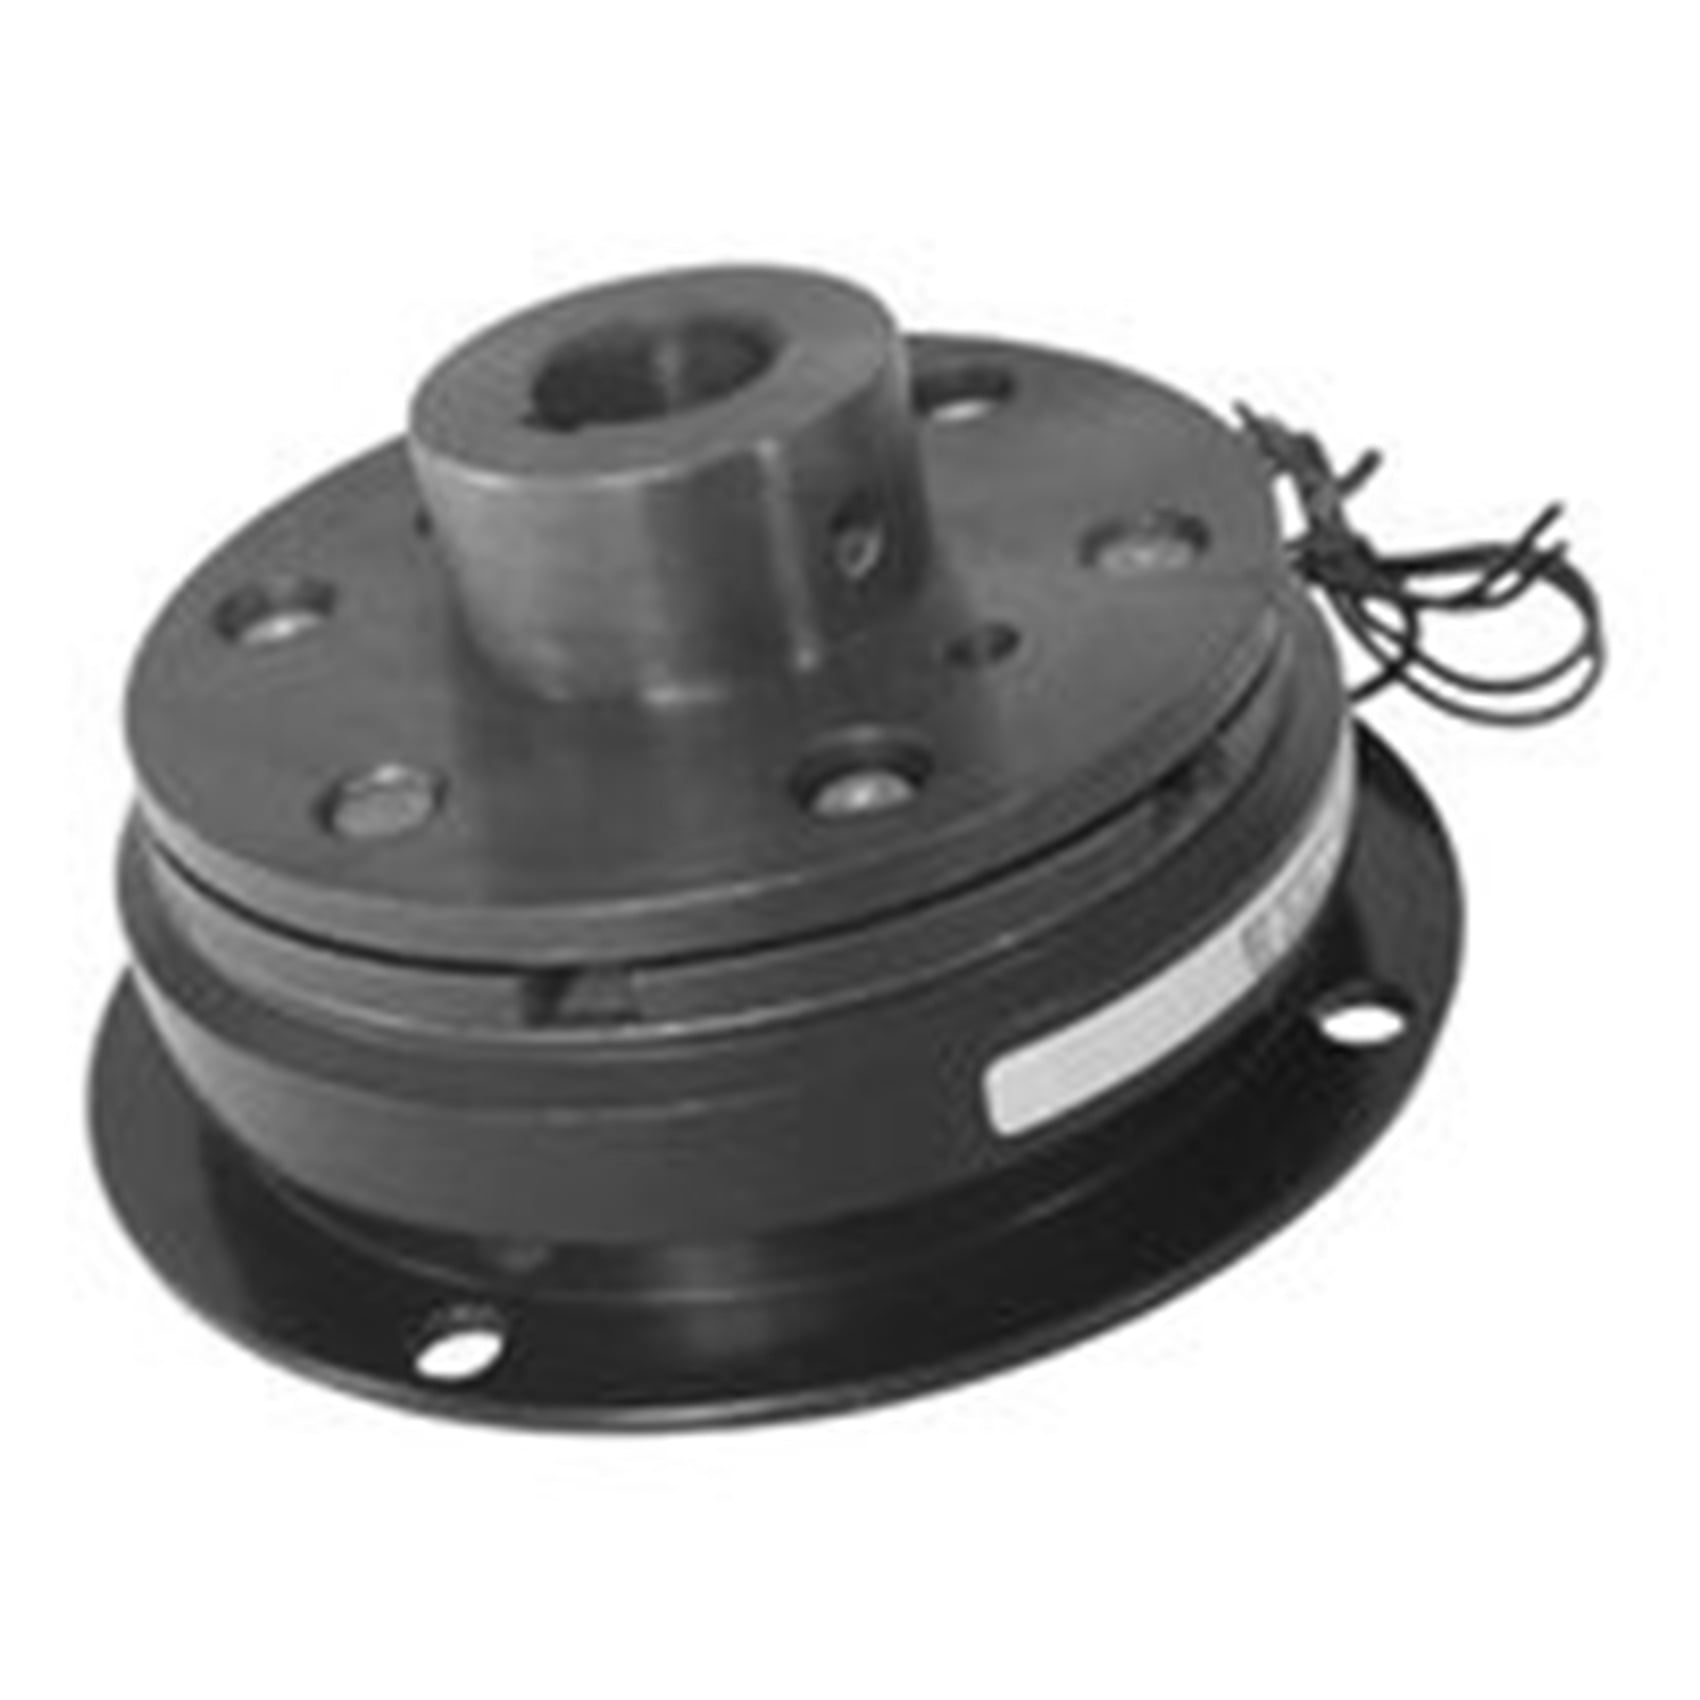 DLD6-05 Electromagnetic Clutch a Type Single Plate Clutch DC24V Dry ...